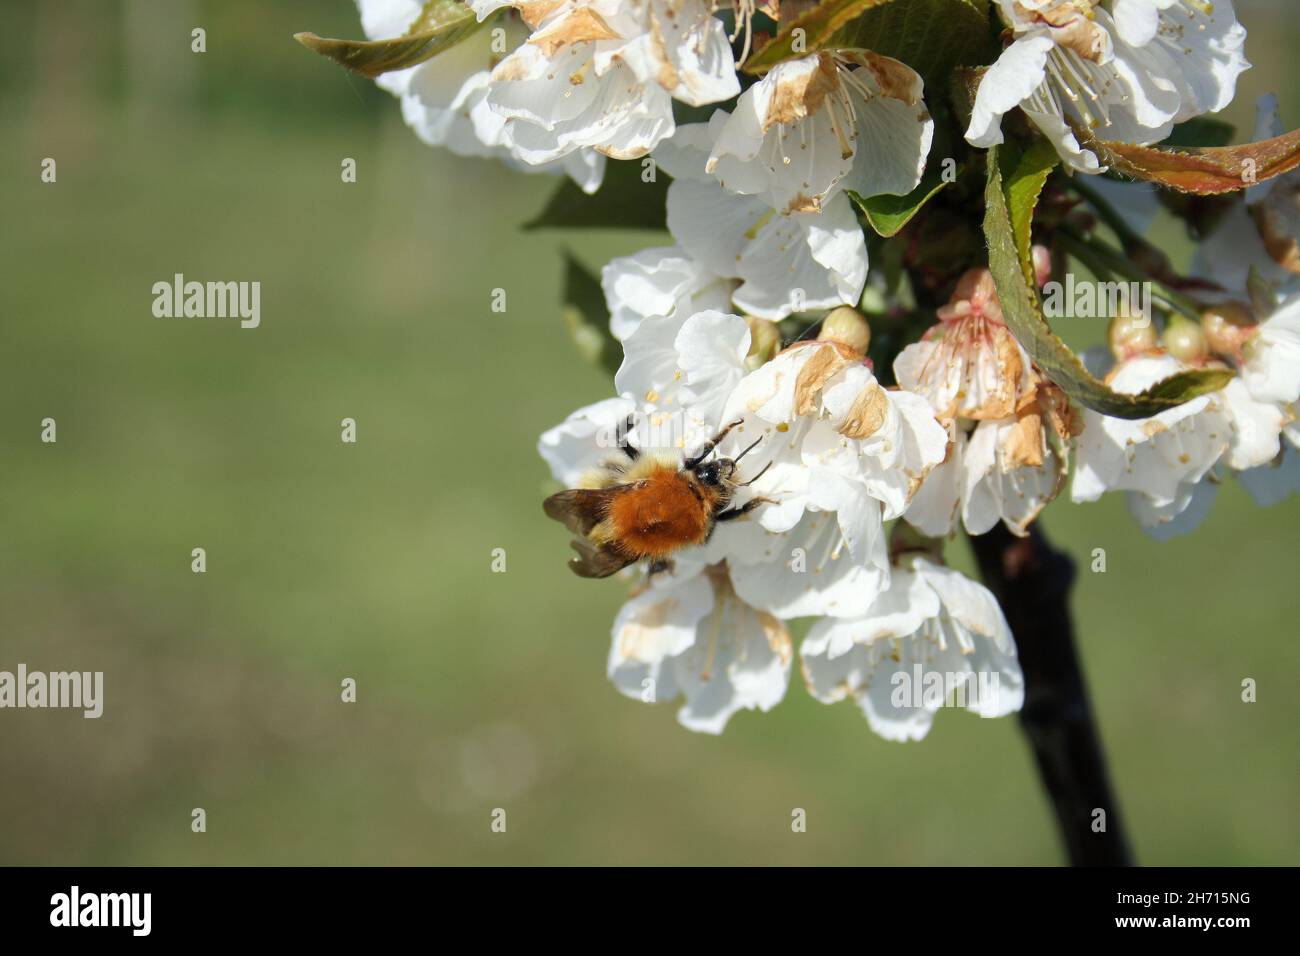 Close-up of a bumble bee on a cherry tree flower Stock Photo